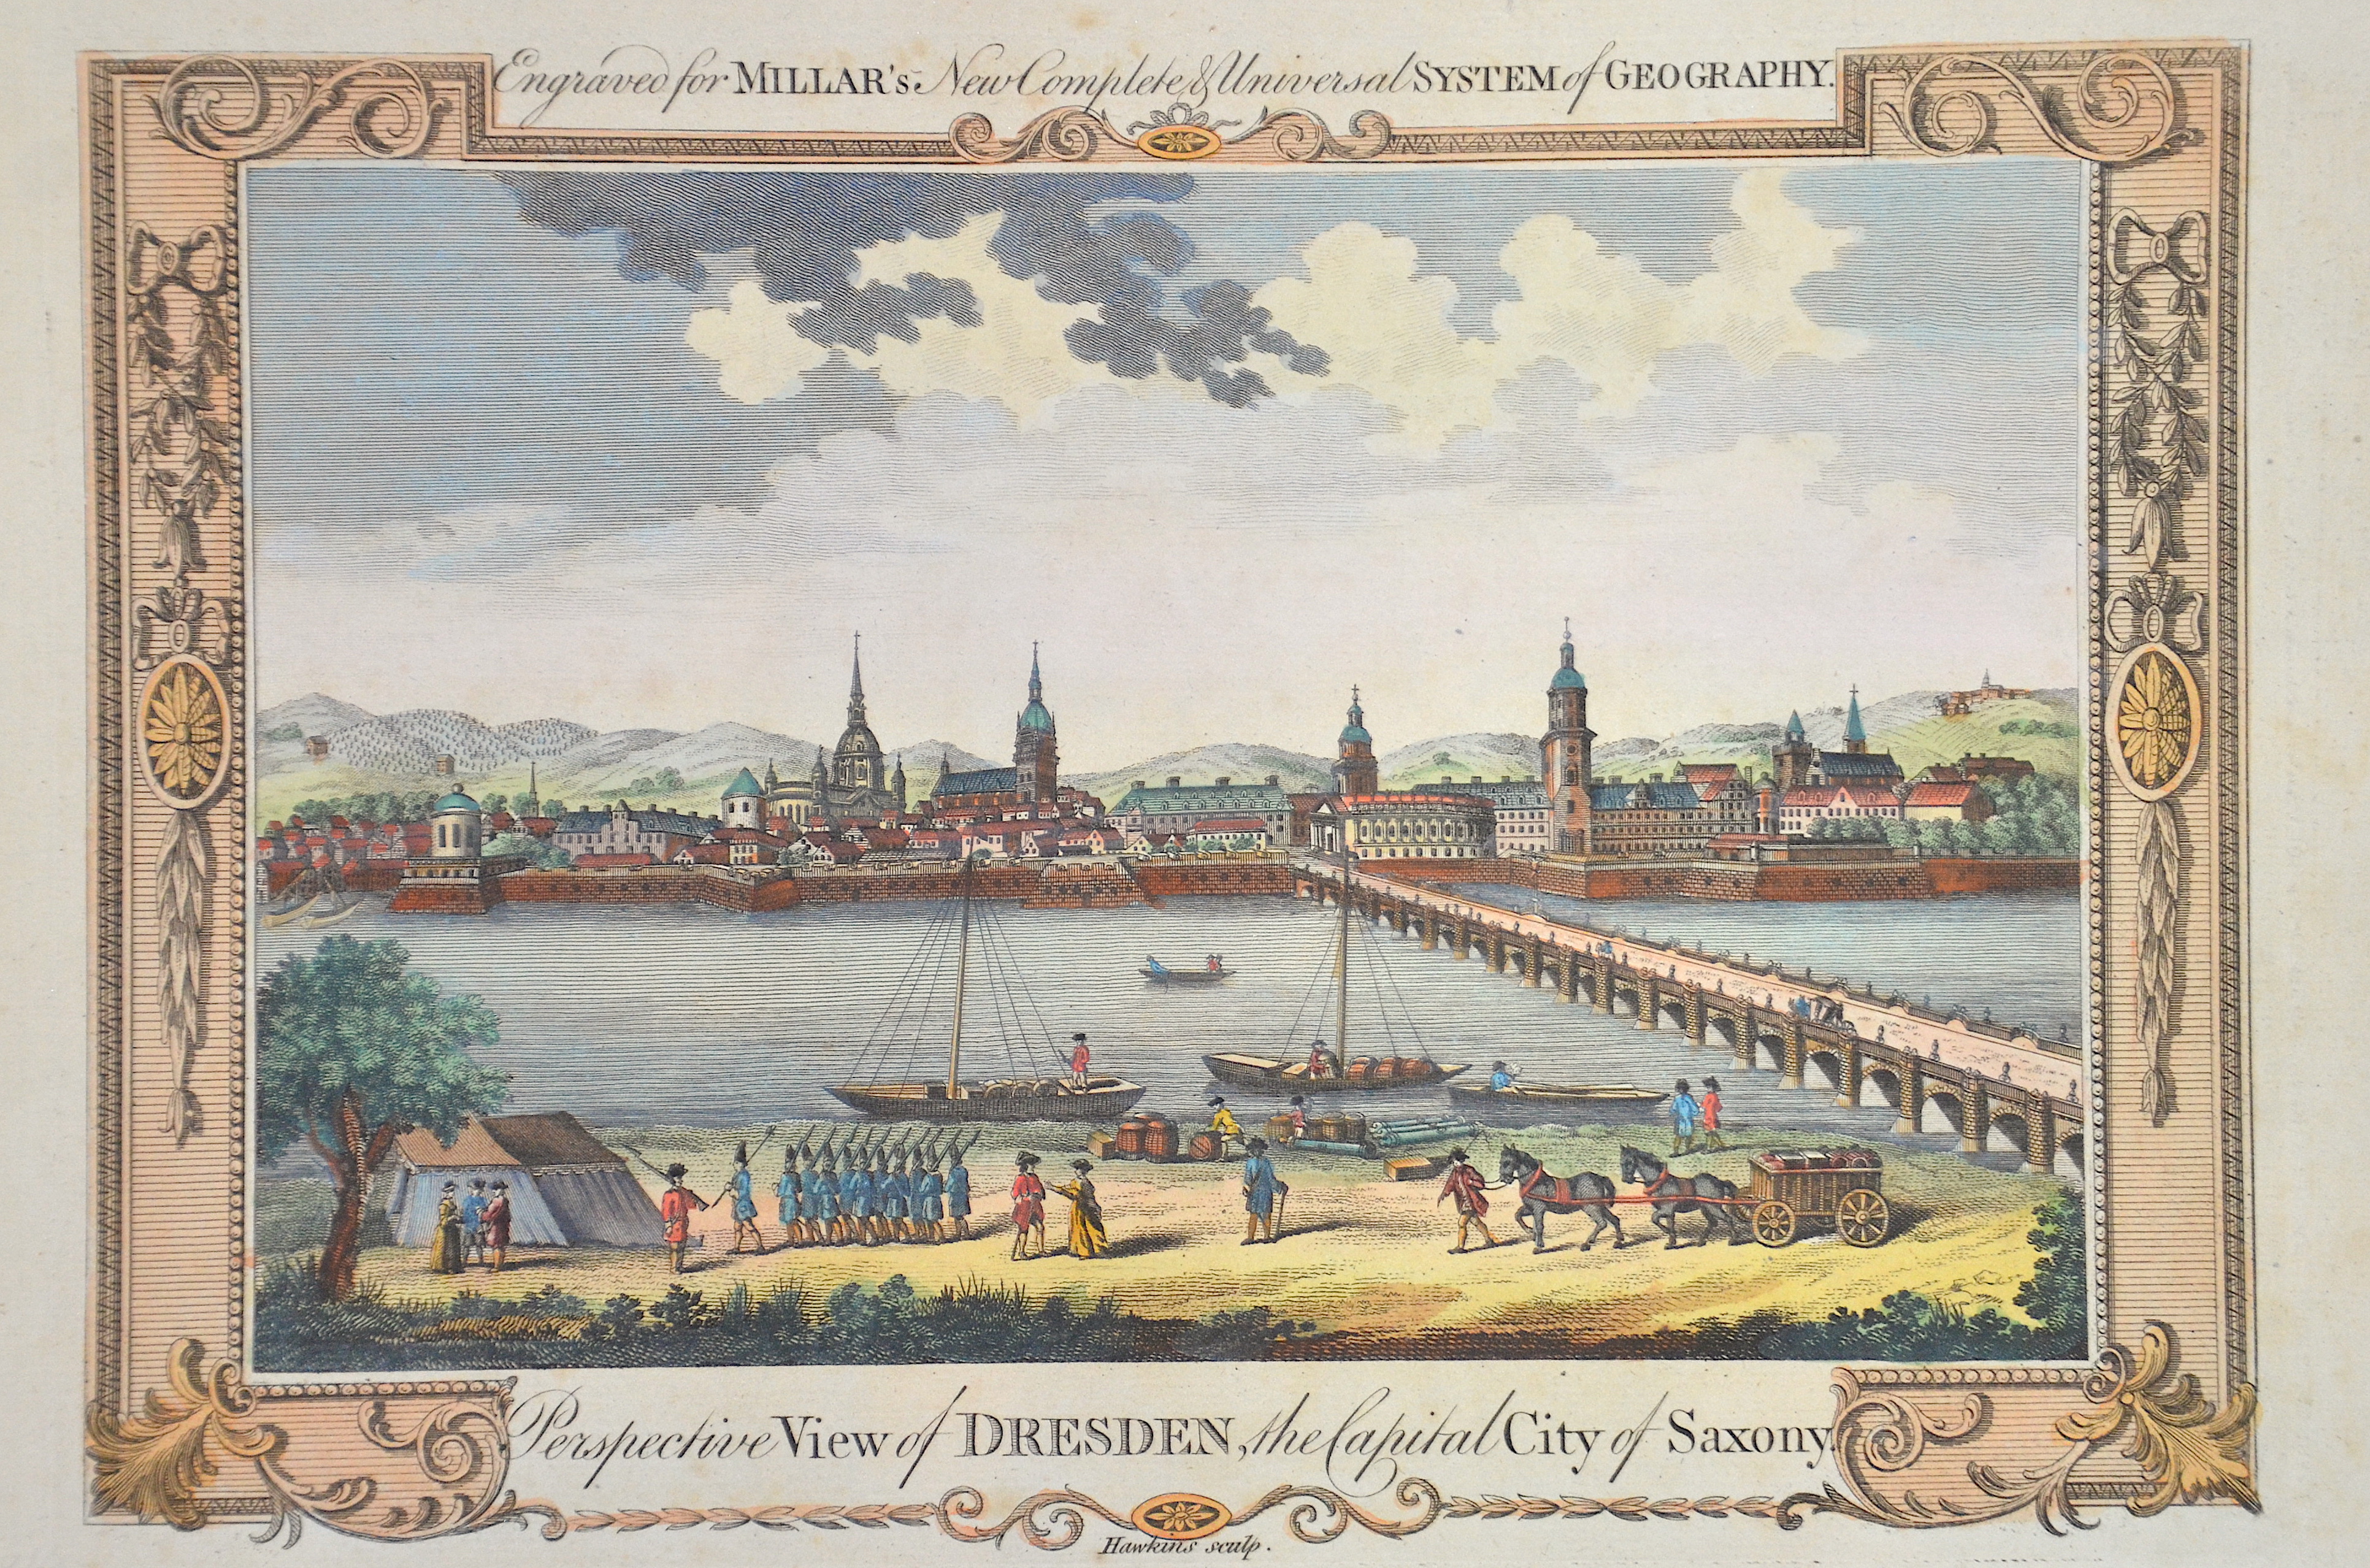 Hawkins  Perspective View of Dresden, the Capital City of Saxony.